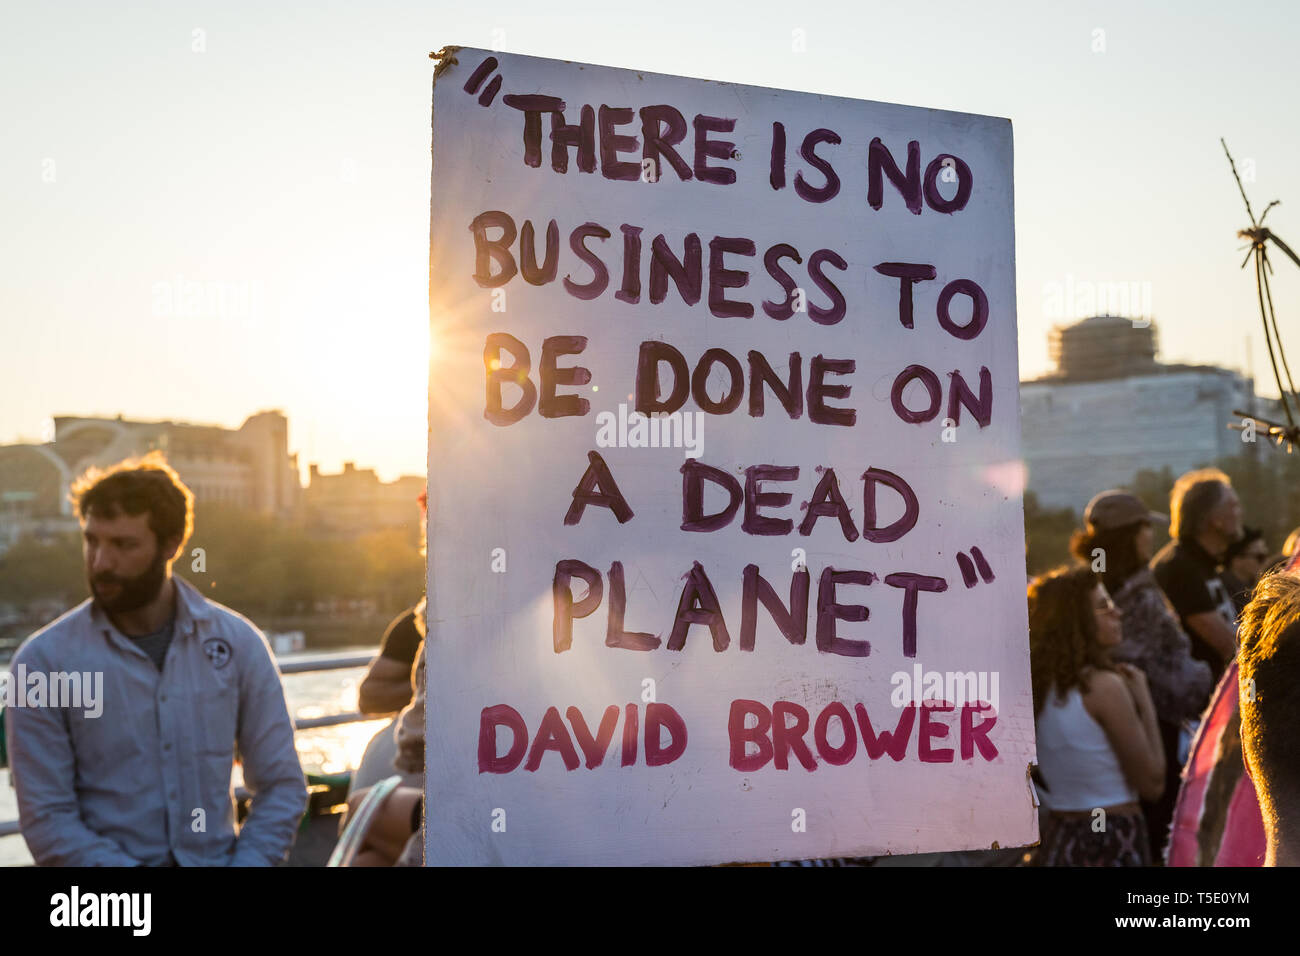 David Brower quote on a placard at the Extinction Rebellion protest on Waterloo Bridge, London Stock Photo